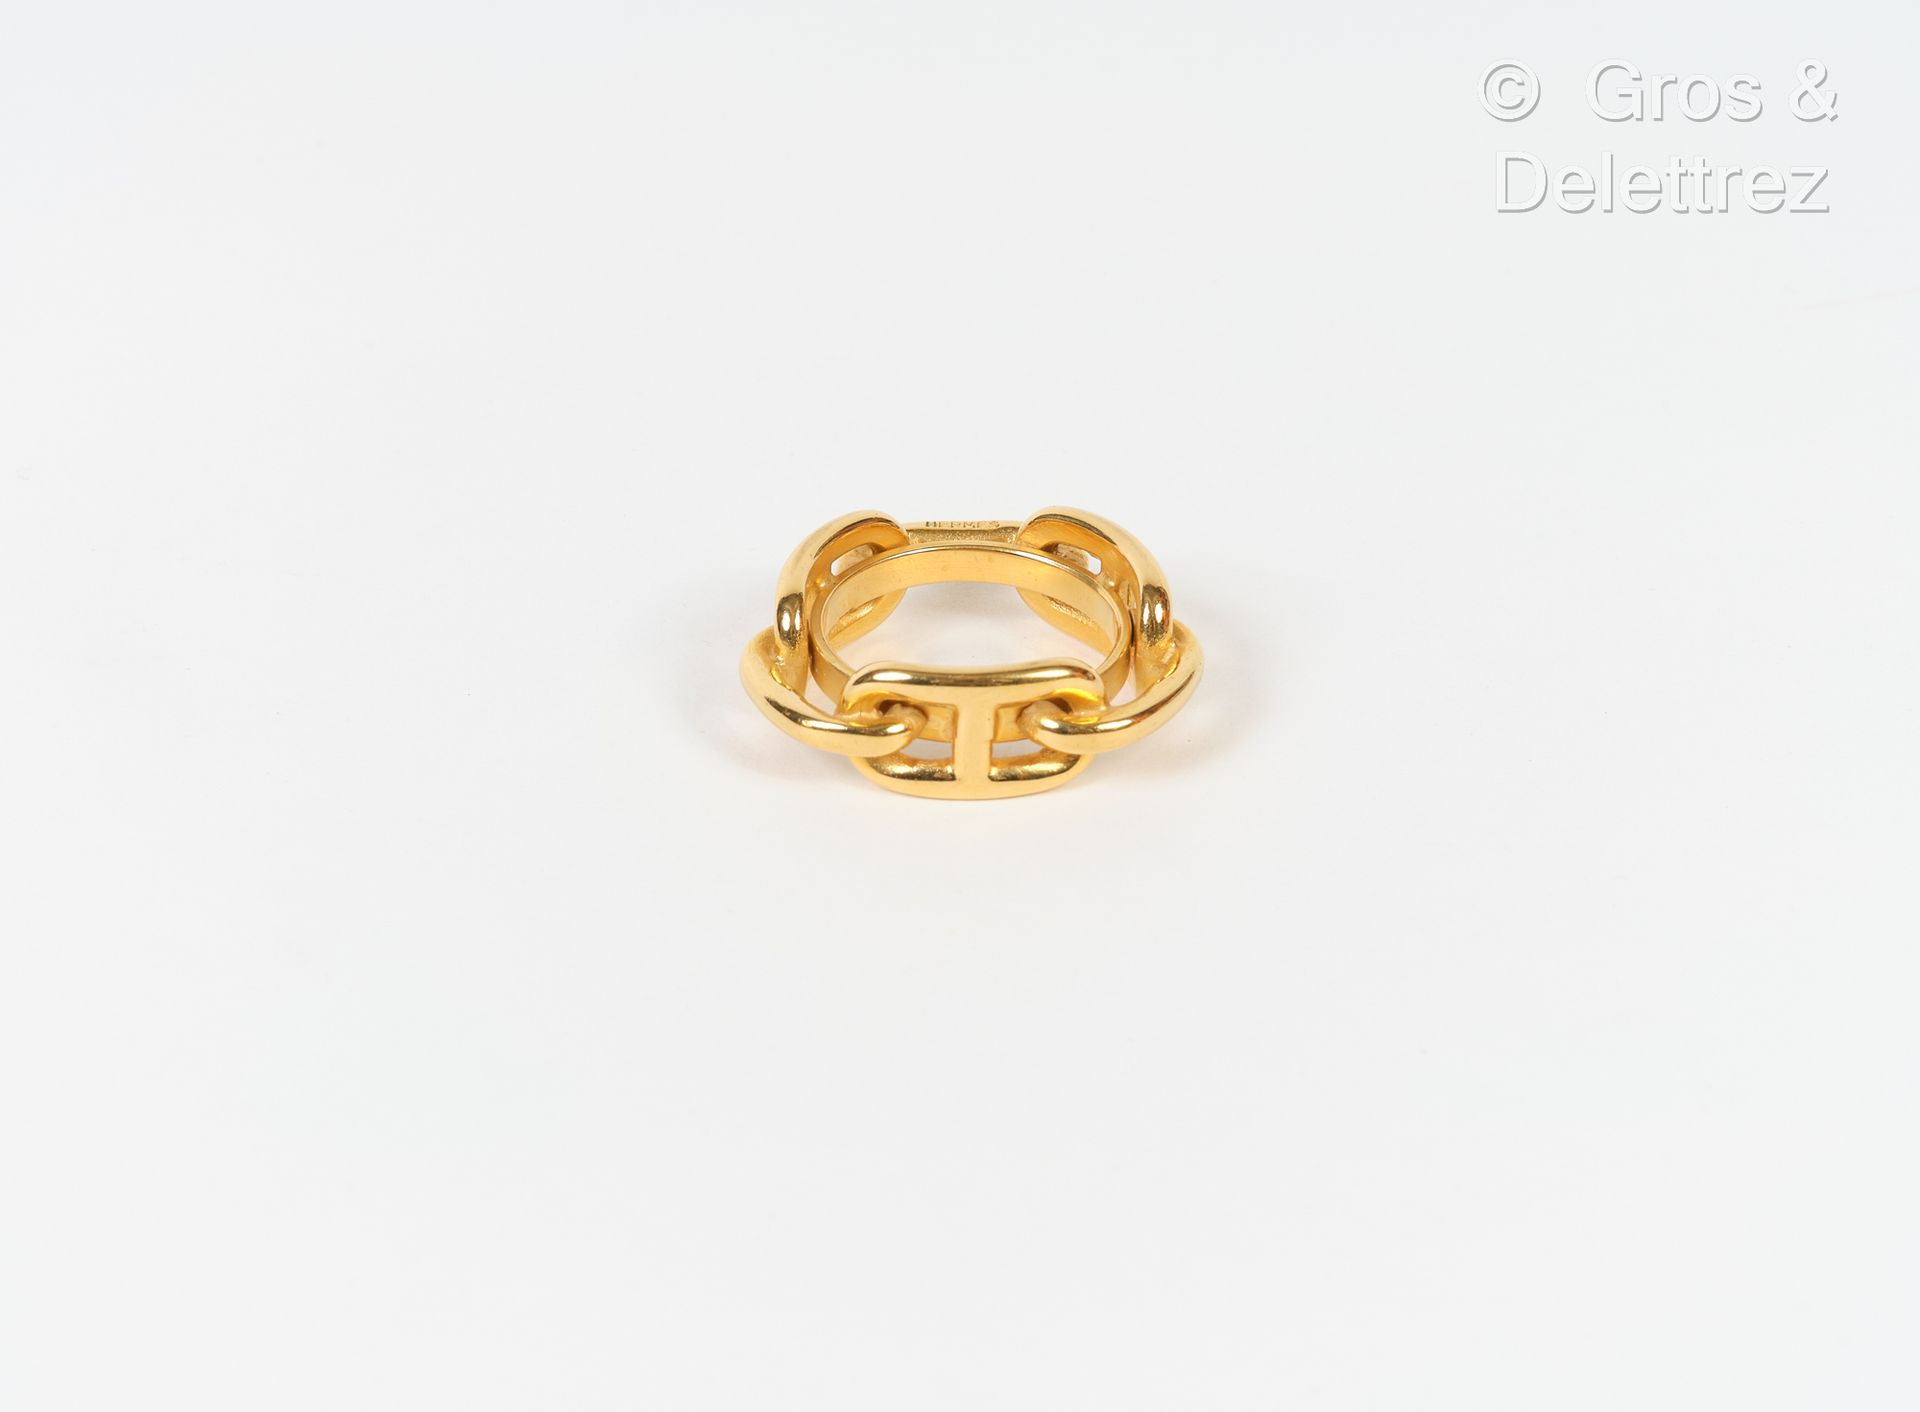 Null HERMES Paris - "Chaîne d'Ancre" scarf ring in gilded metal.